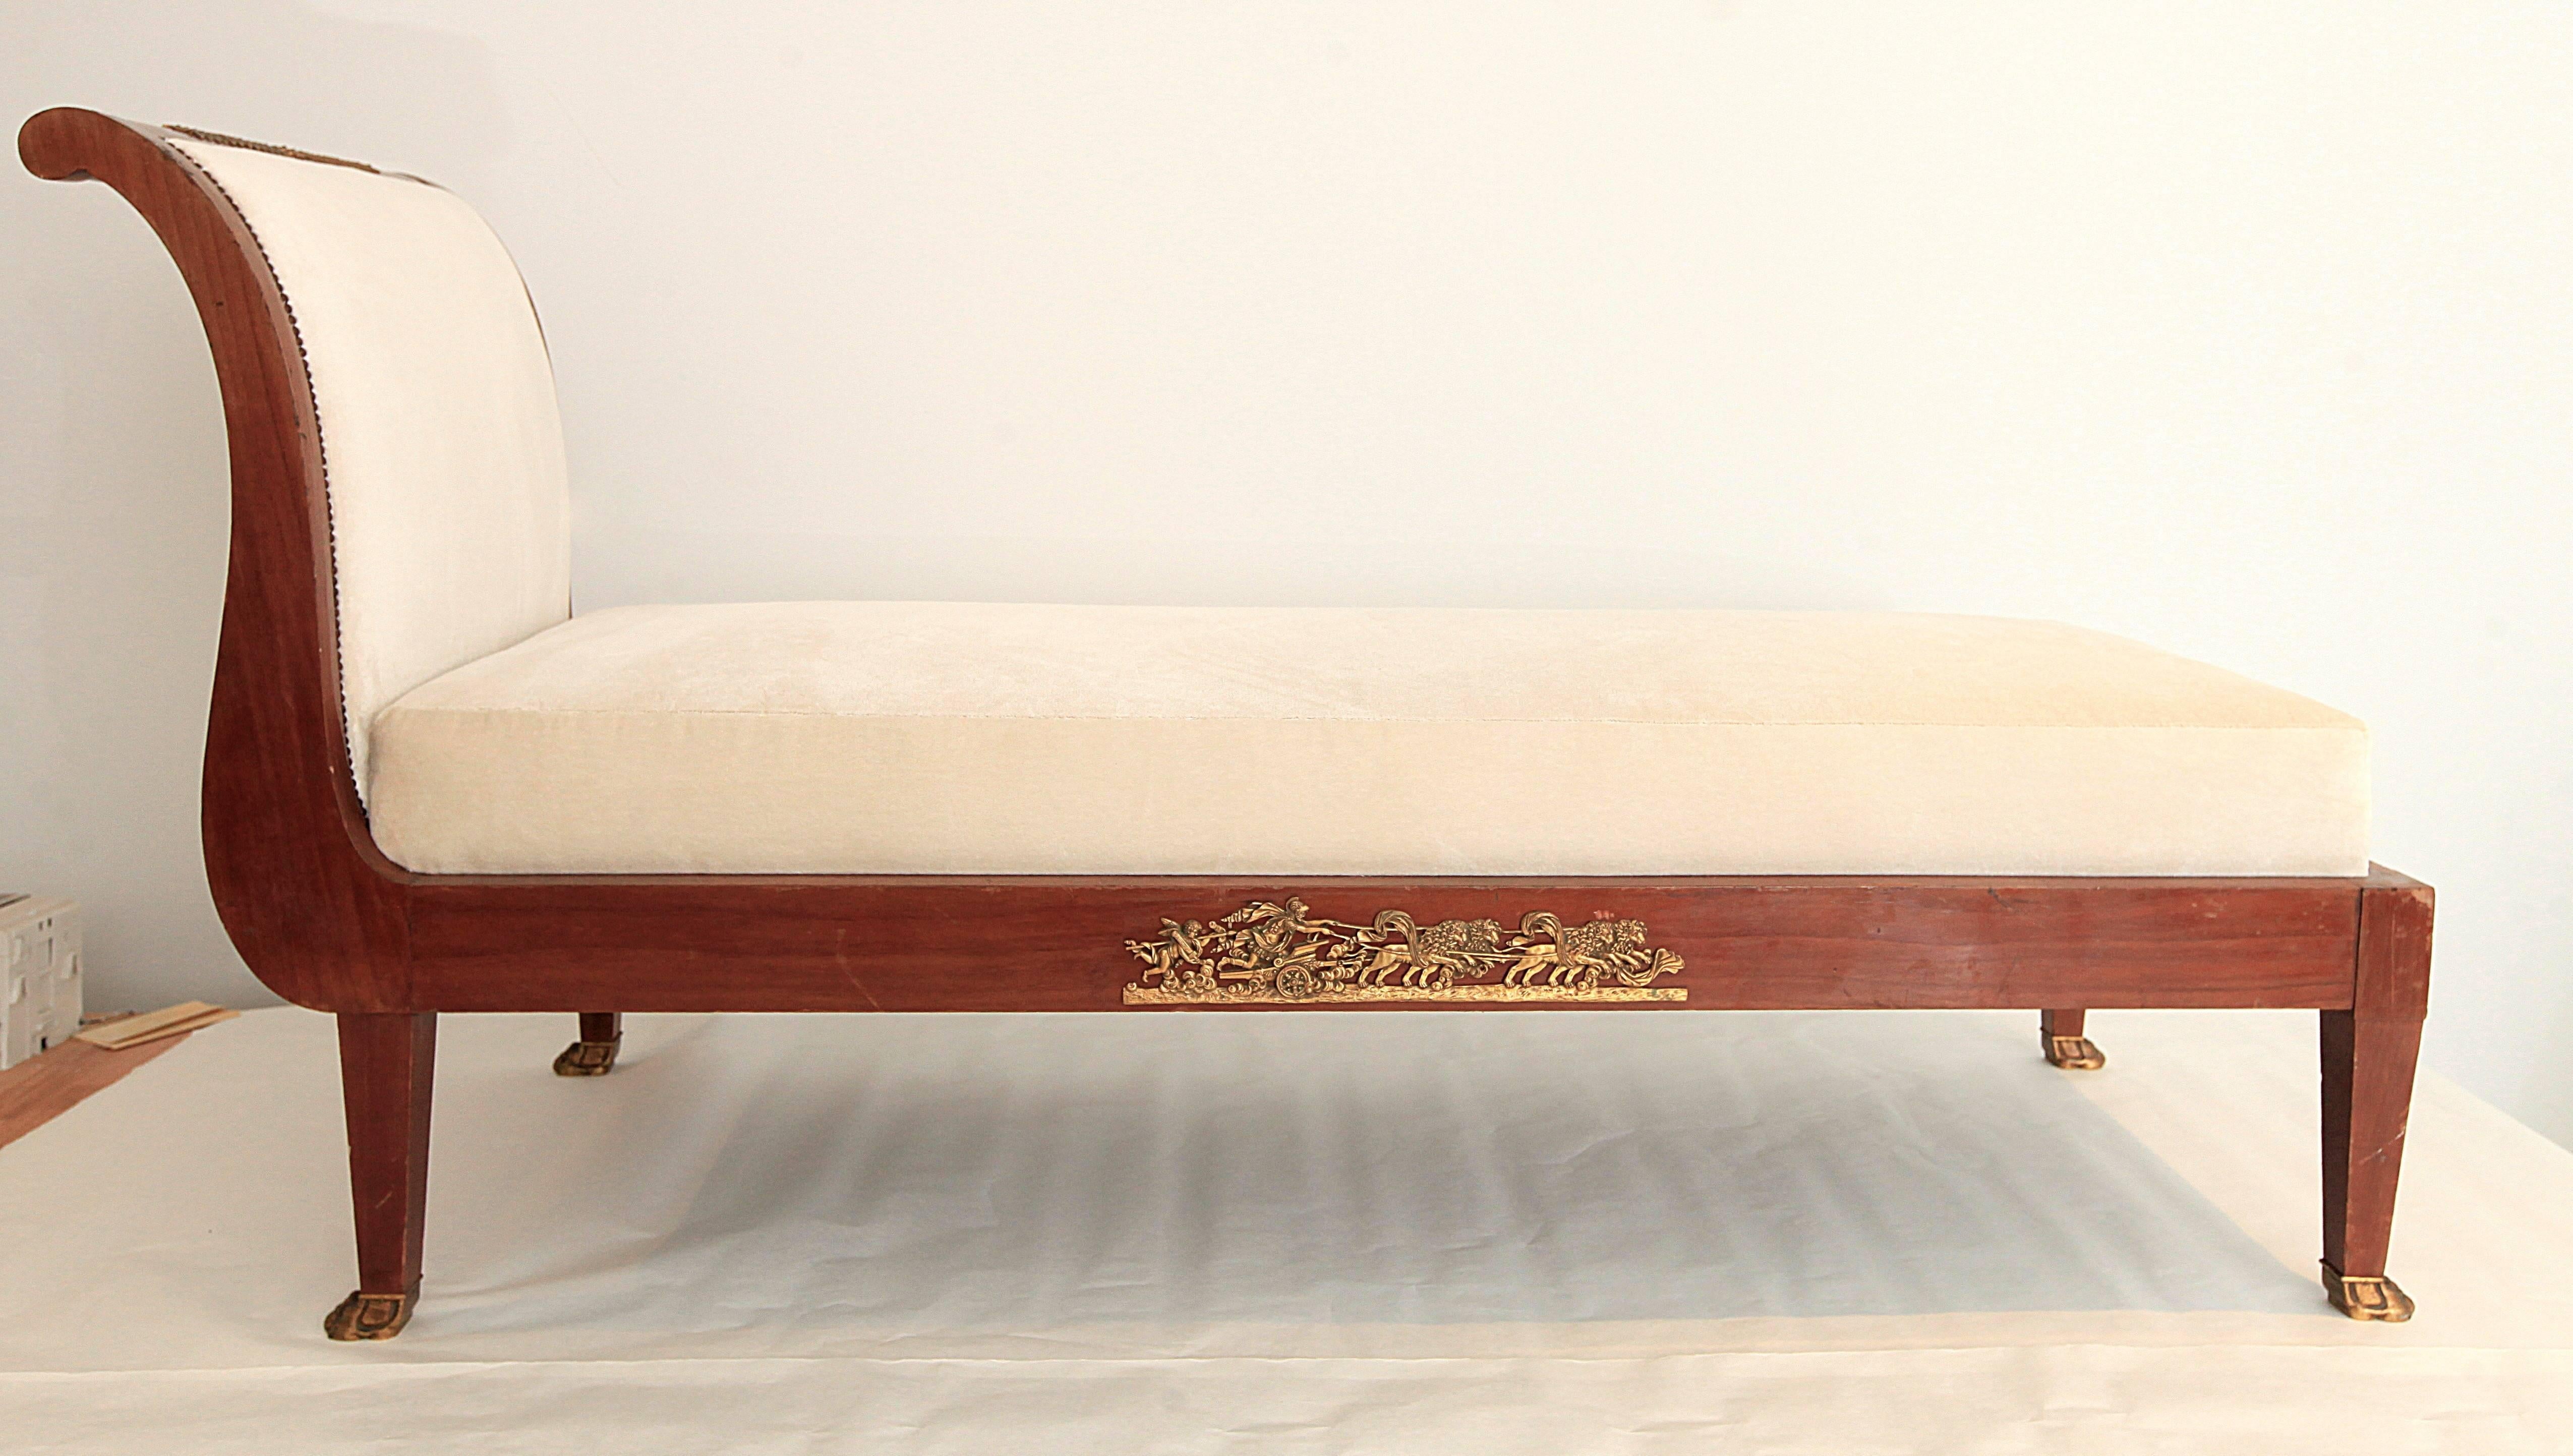 A beautiful mahogany French Empire chaise with wonderful Roman inspired ormolu. This chaise has been newly upholstered in a luxurious creamy ecru cashmere-silk velvet.

Overall dimensions: 26